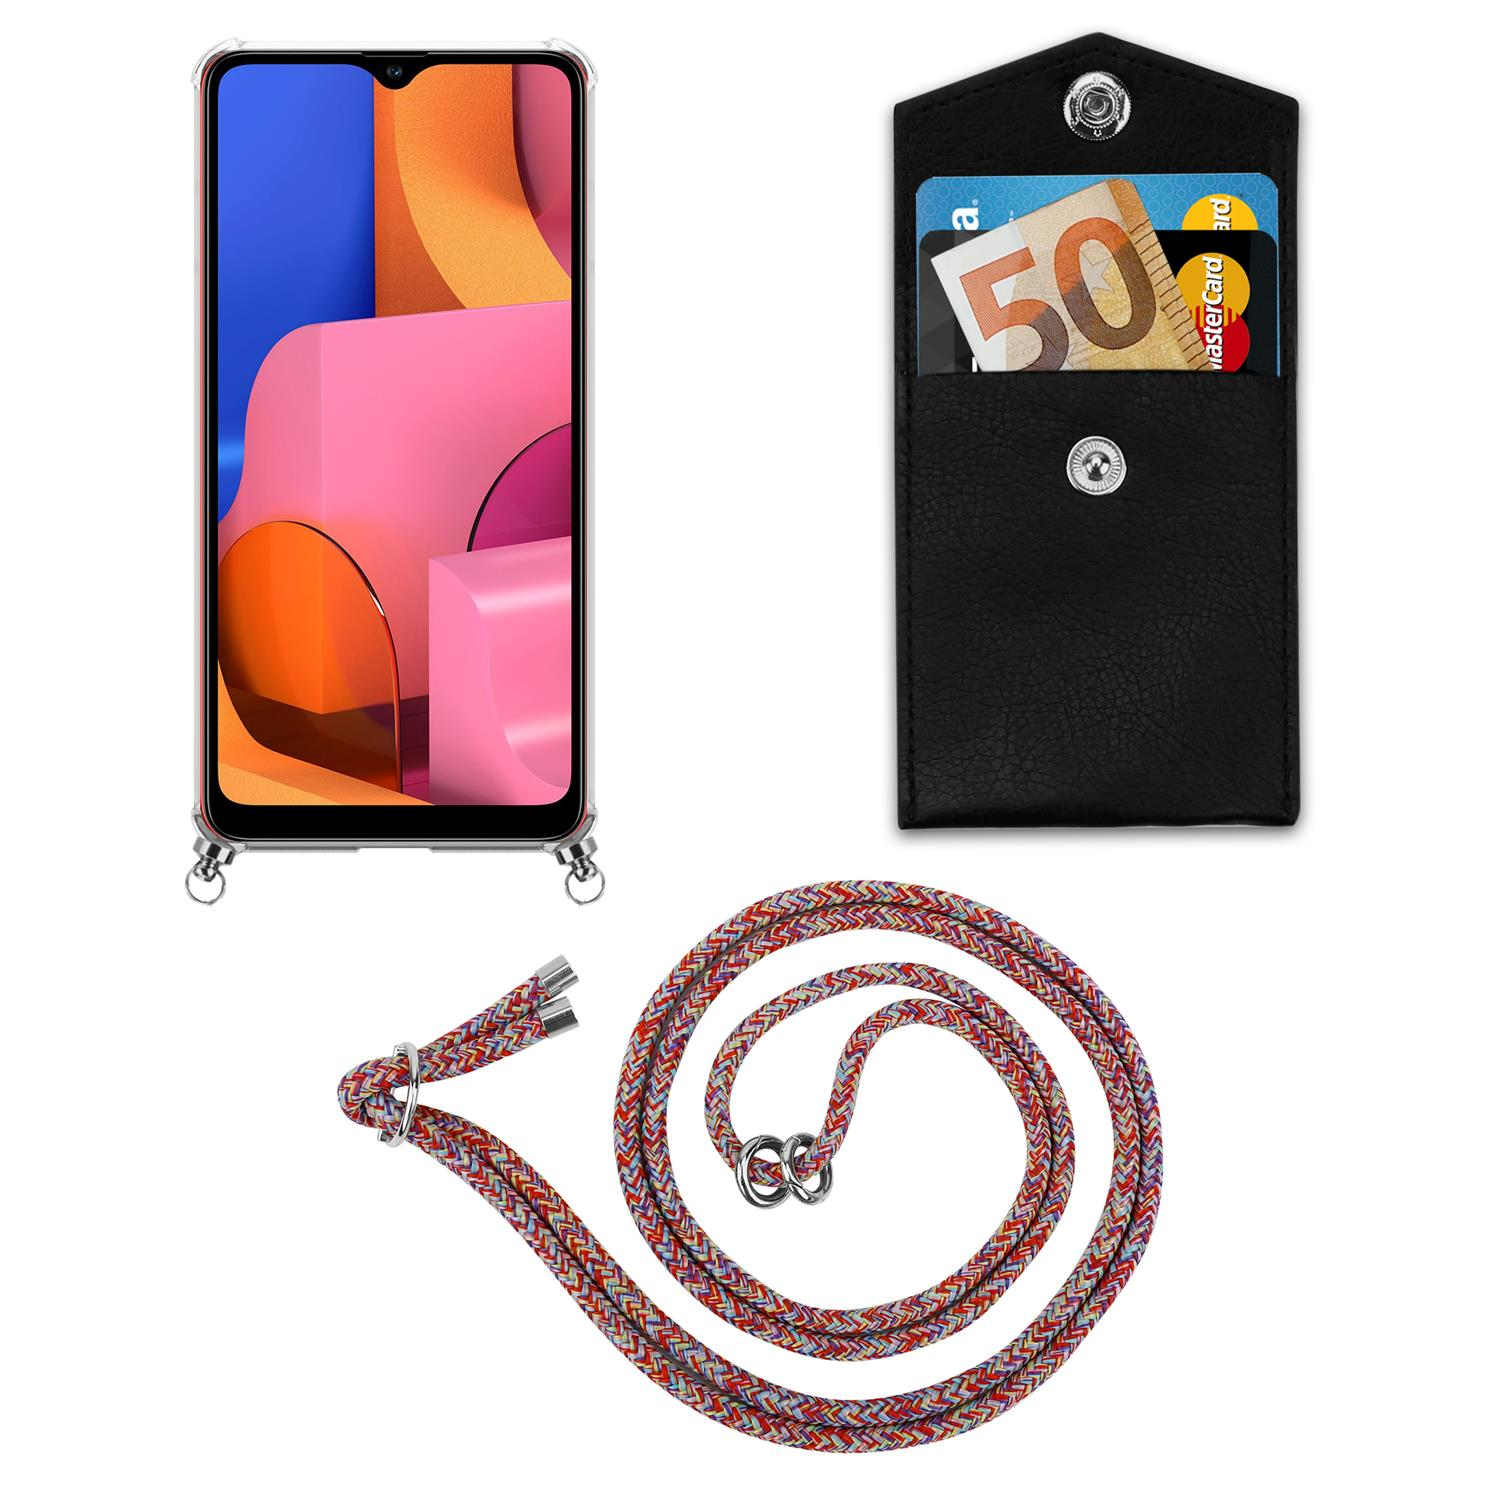 CADORABO Handy und Silber Kette Band Backcover, Ringen, abnehmbarer COLORFUL mit A20s, Samsung, PARROT Kordel Galaxy Hülle